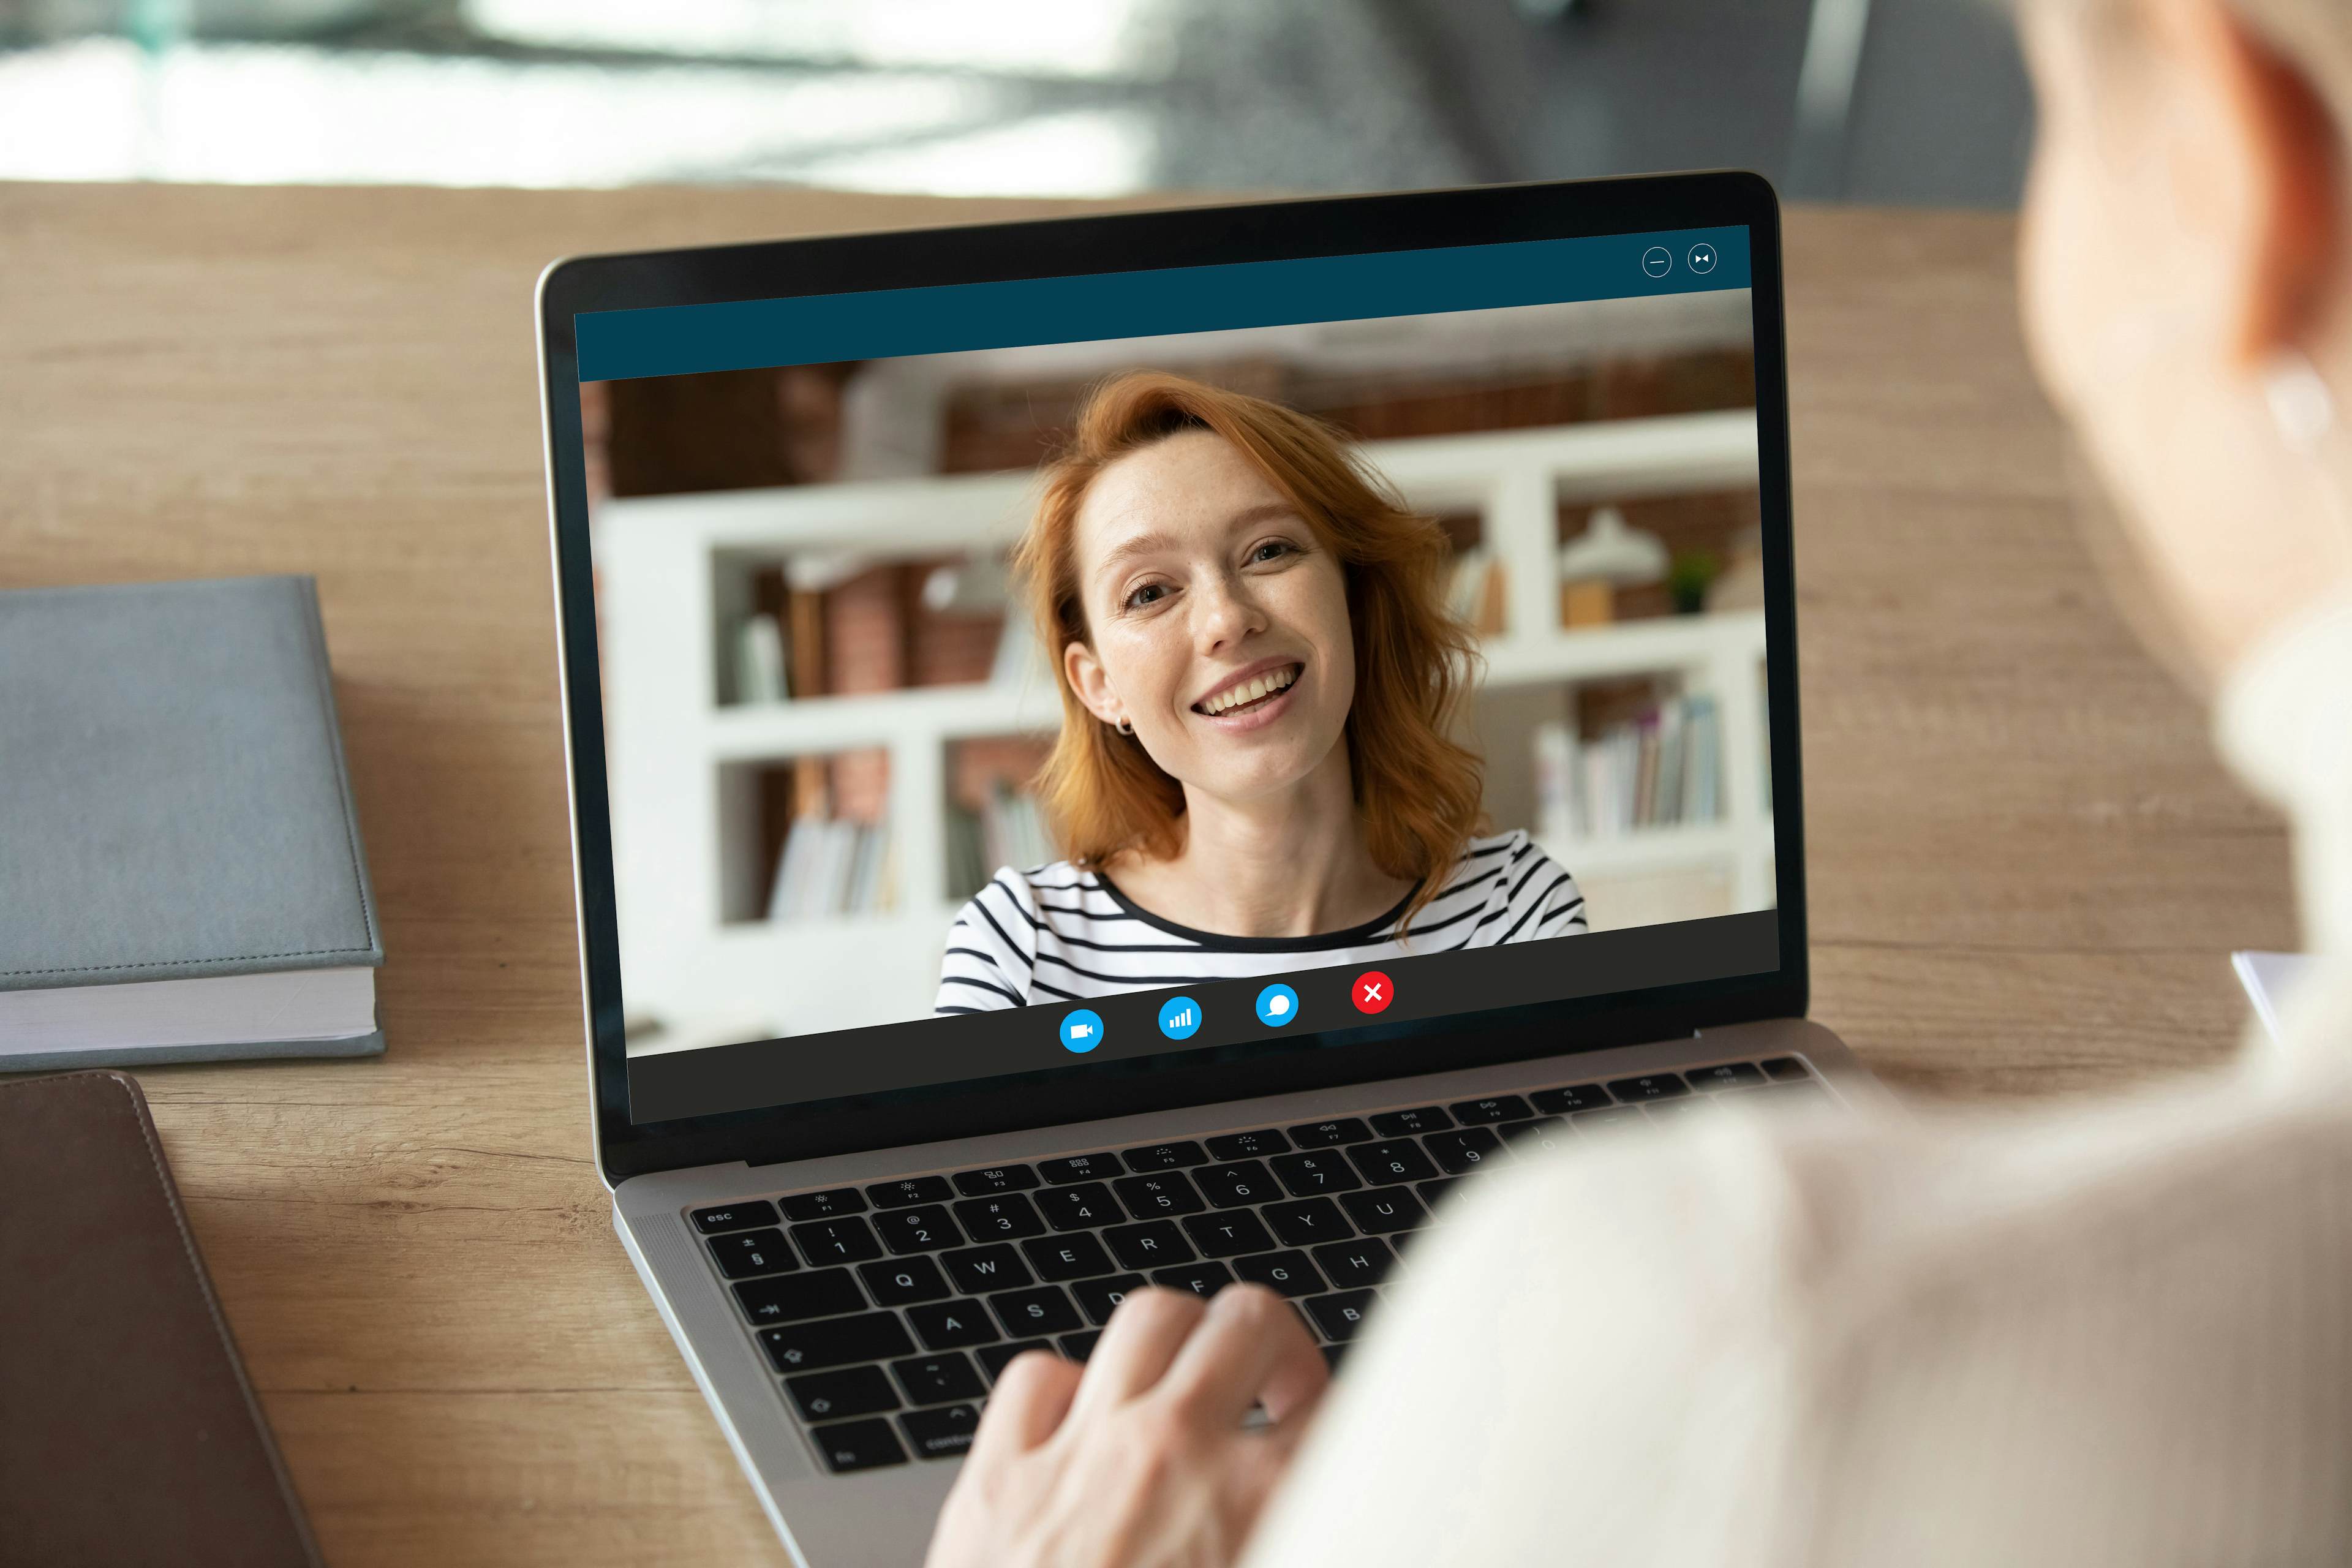 People connecting via videochat